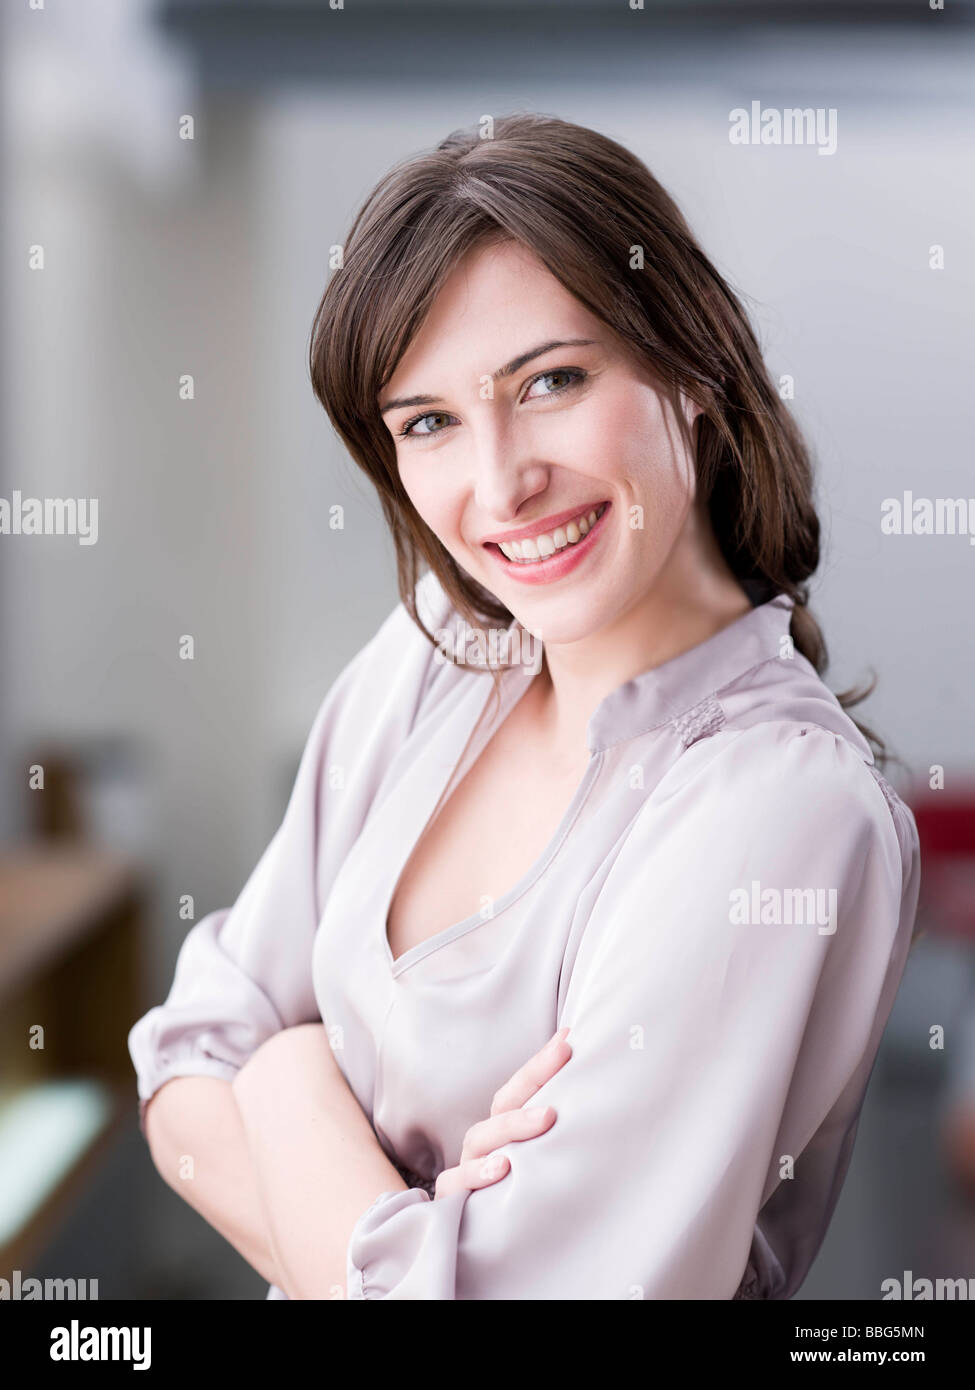 Woman smiling at viewer Stock Photo